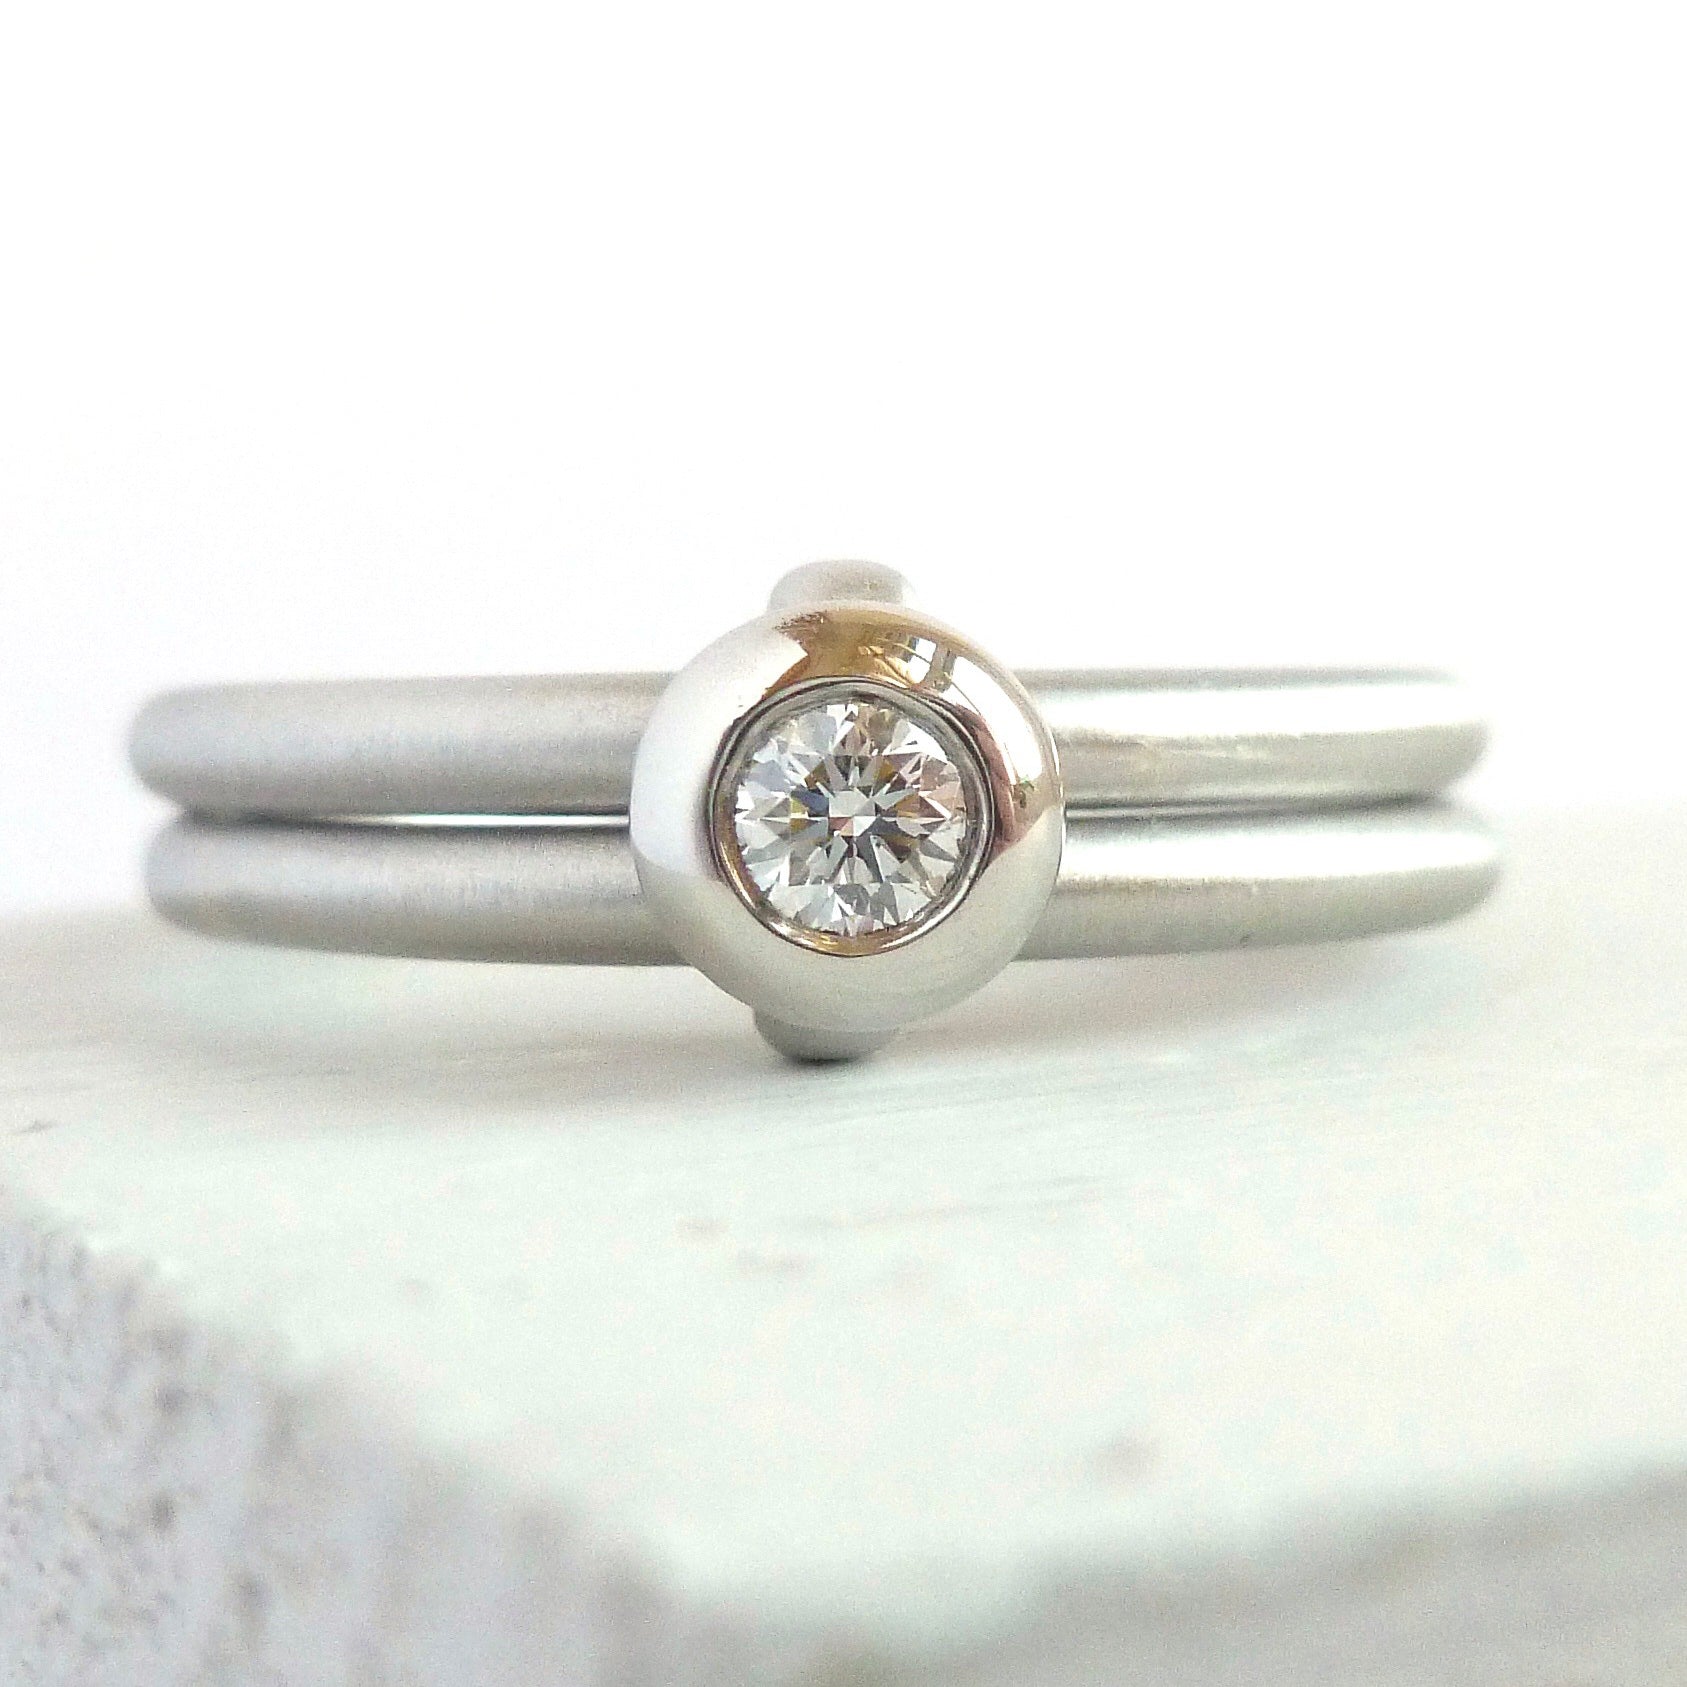 Contemporary platinum two band engagement ring with diamond. Bespoke. Multi band ring or interlocking ring, sometimes called double band ring too.